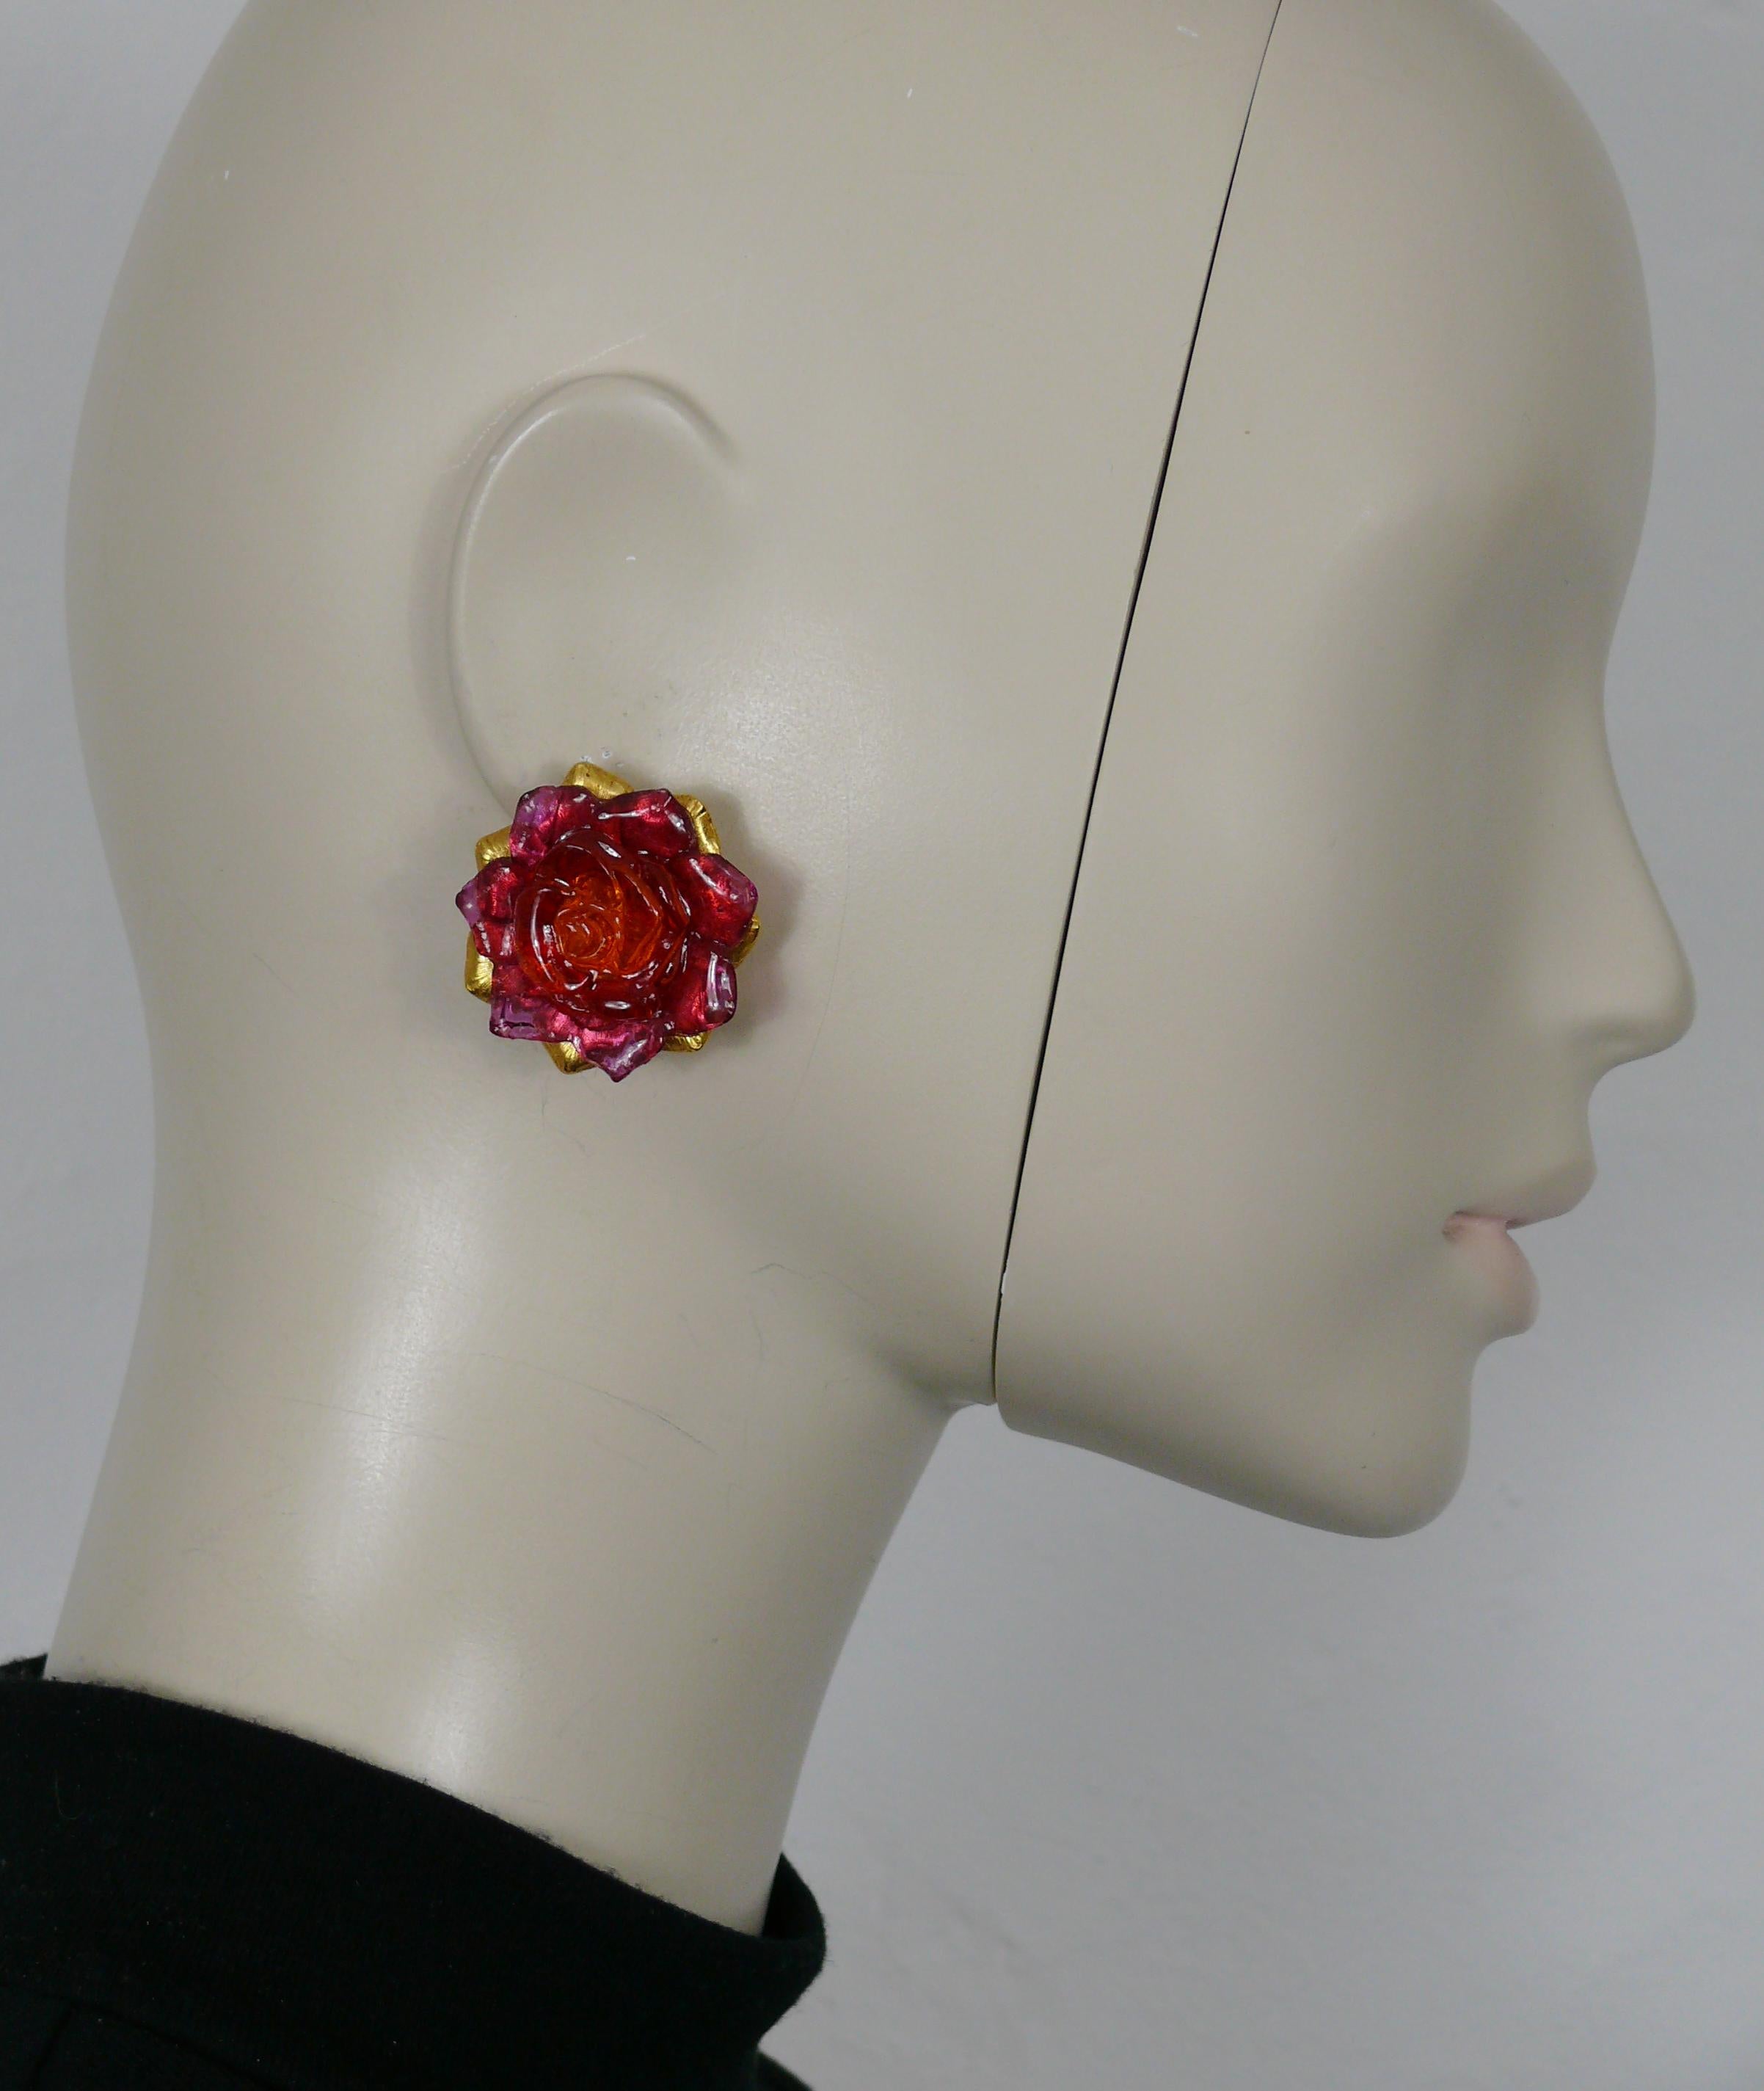 L'OR DU SOIR vintage gold tone clip-on earrings featuring a pink and orange resin flower.

Embossed L'OR DU SOIR Paris.

Indicative measurements : approx. 3.5 cm x 3.5 cm (1.38 inches x 1.38 inches).

Weight per earring : approx. 15